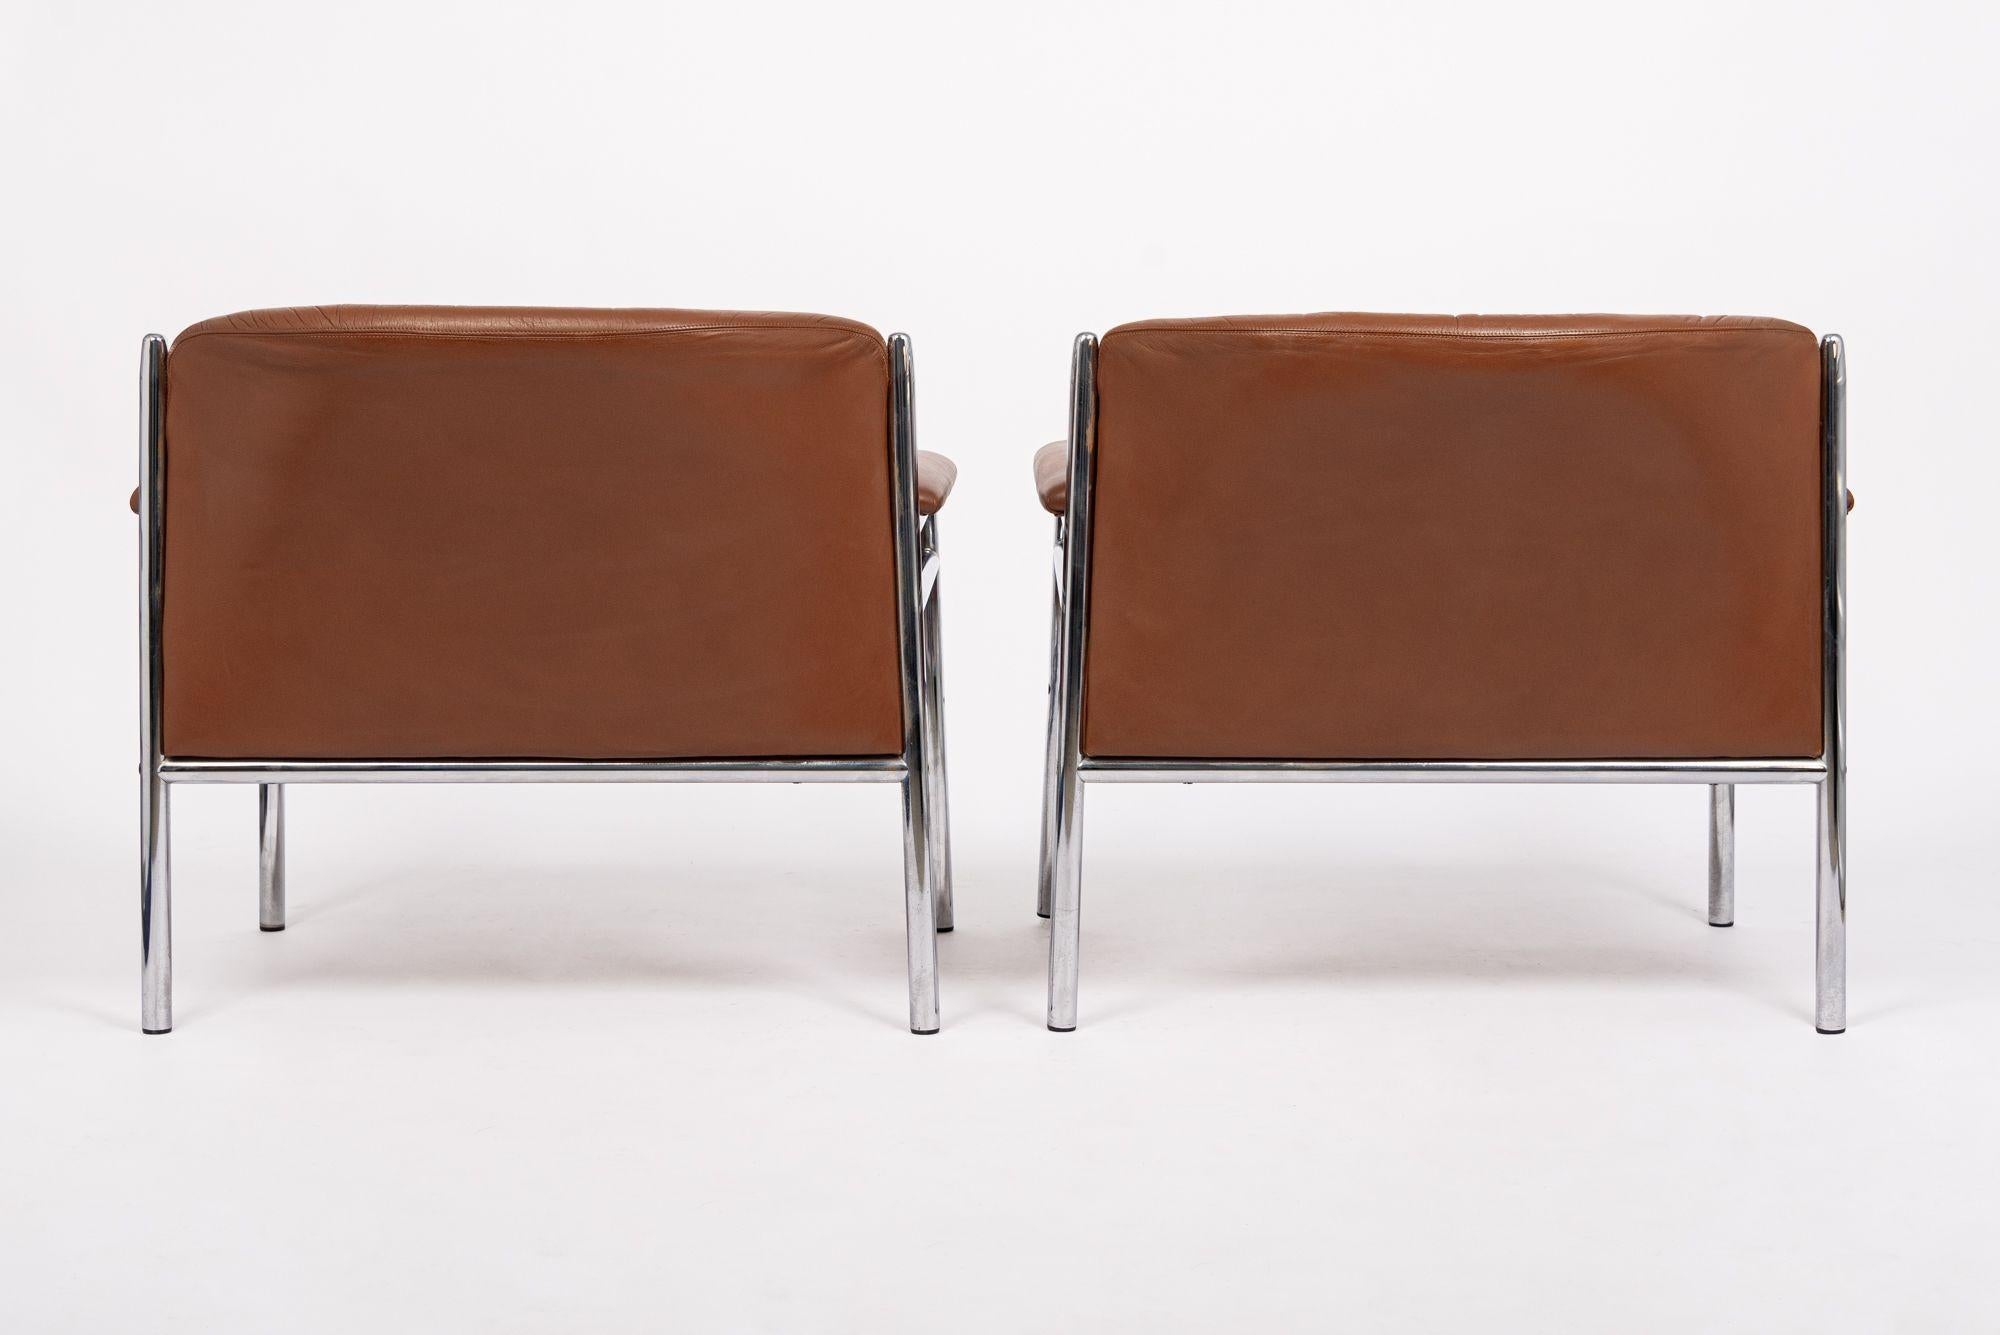 20th Century Mid Century Caramel Brown Leather Lounge Chairs by Stendig 1960s For Sale